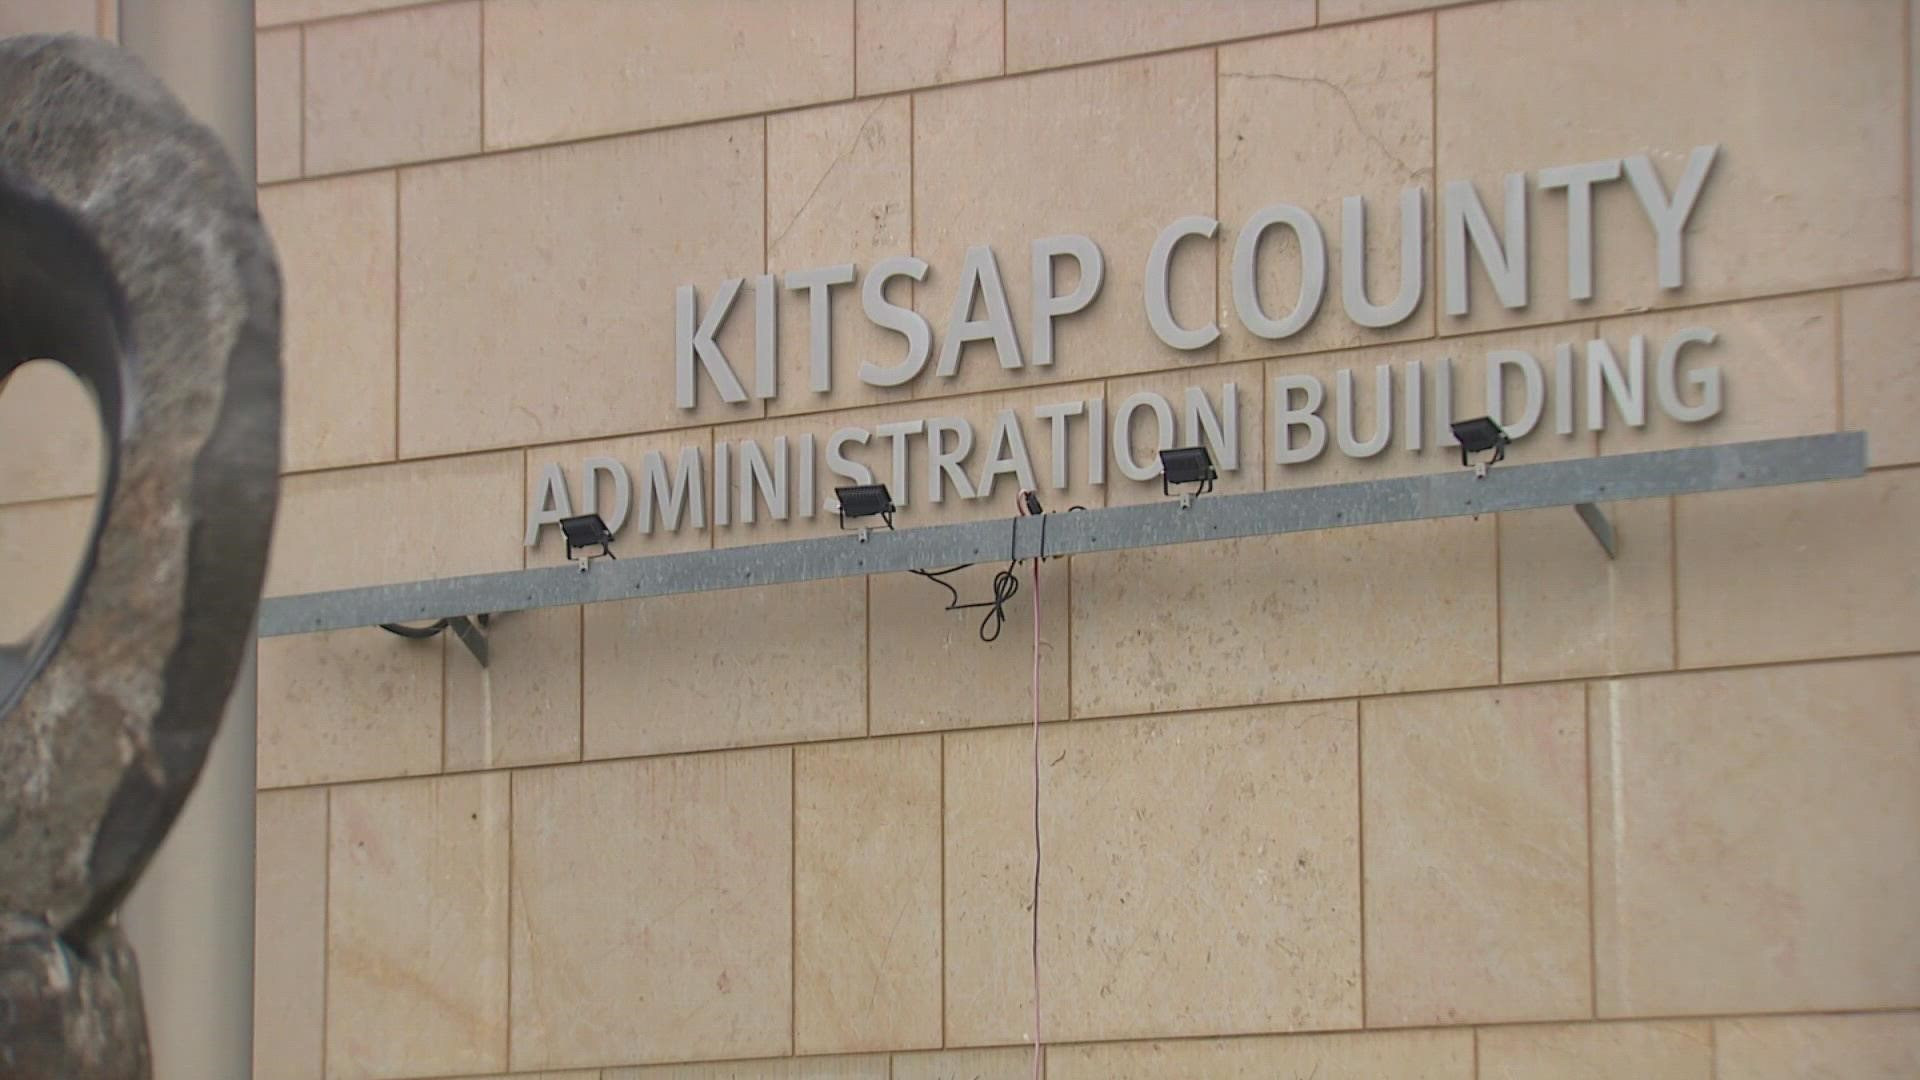 Kitsap County says the idea aims to not only keep employees safe, but also lowers the costs of protecting them. But not everyone is on board.